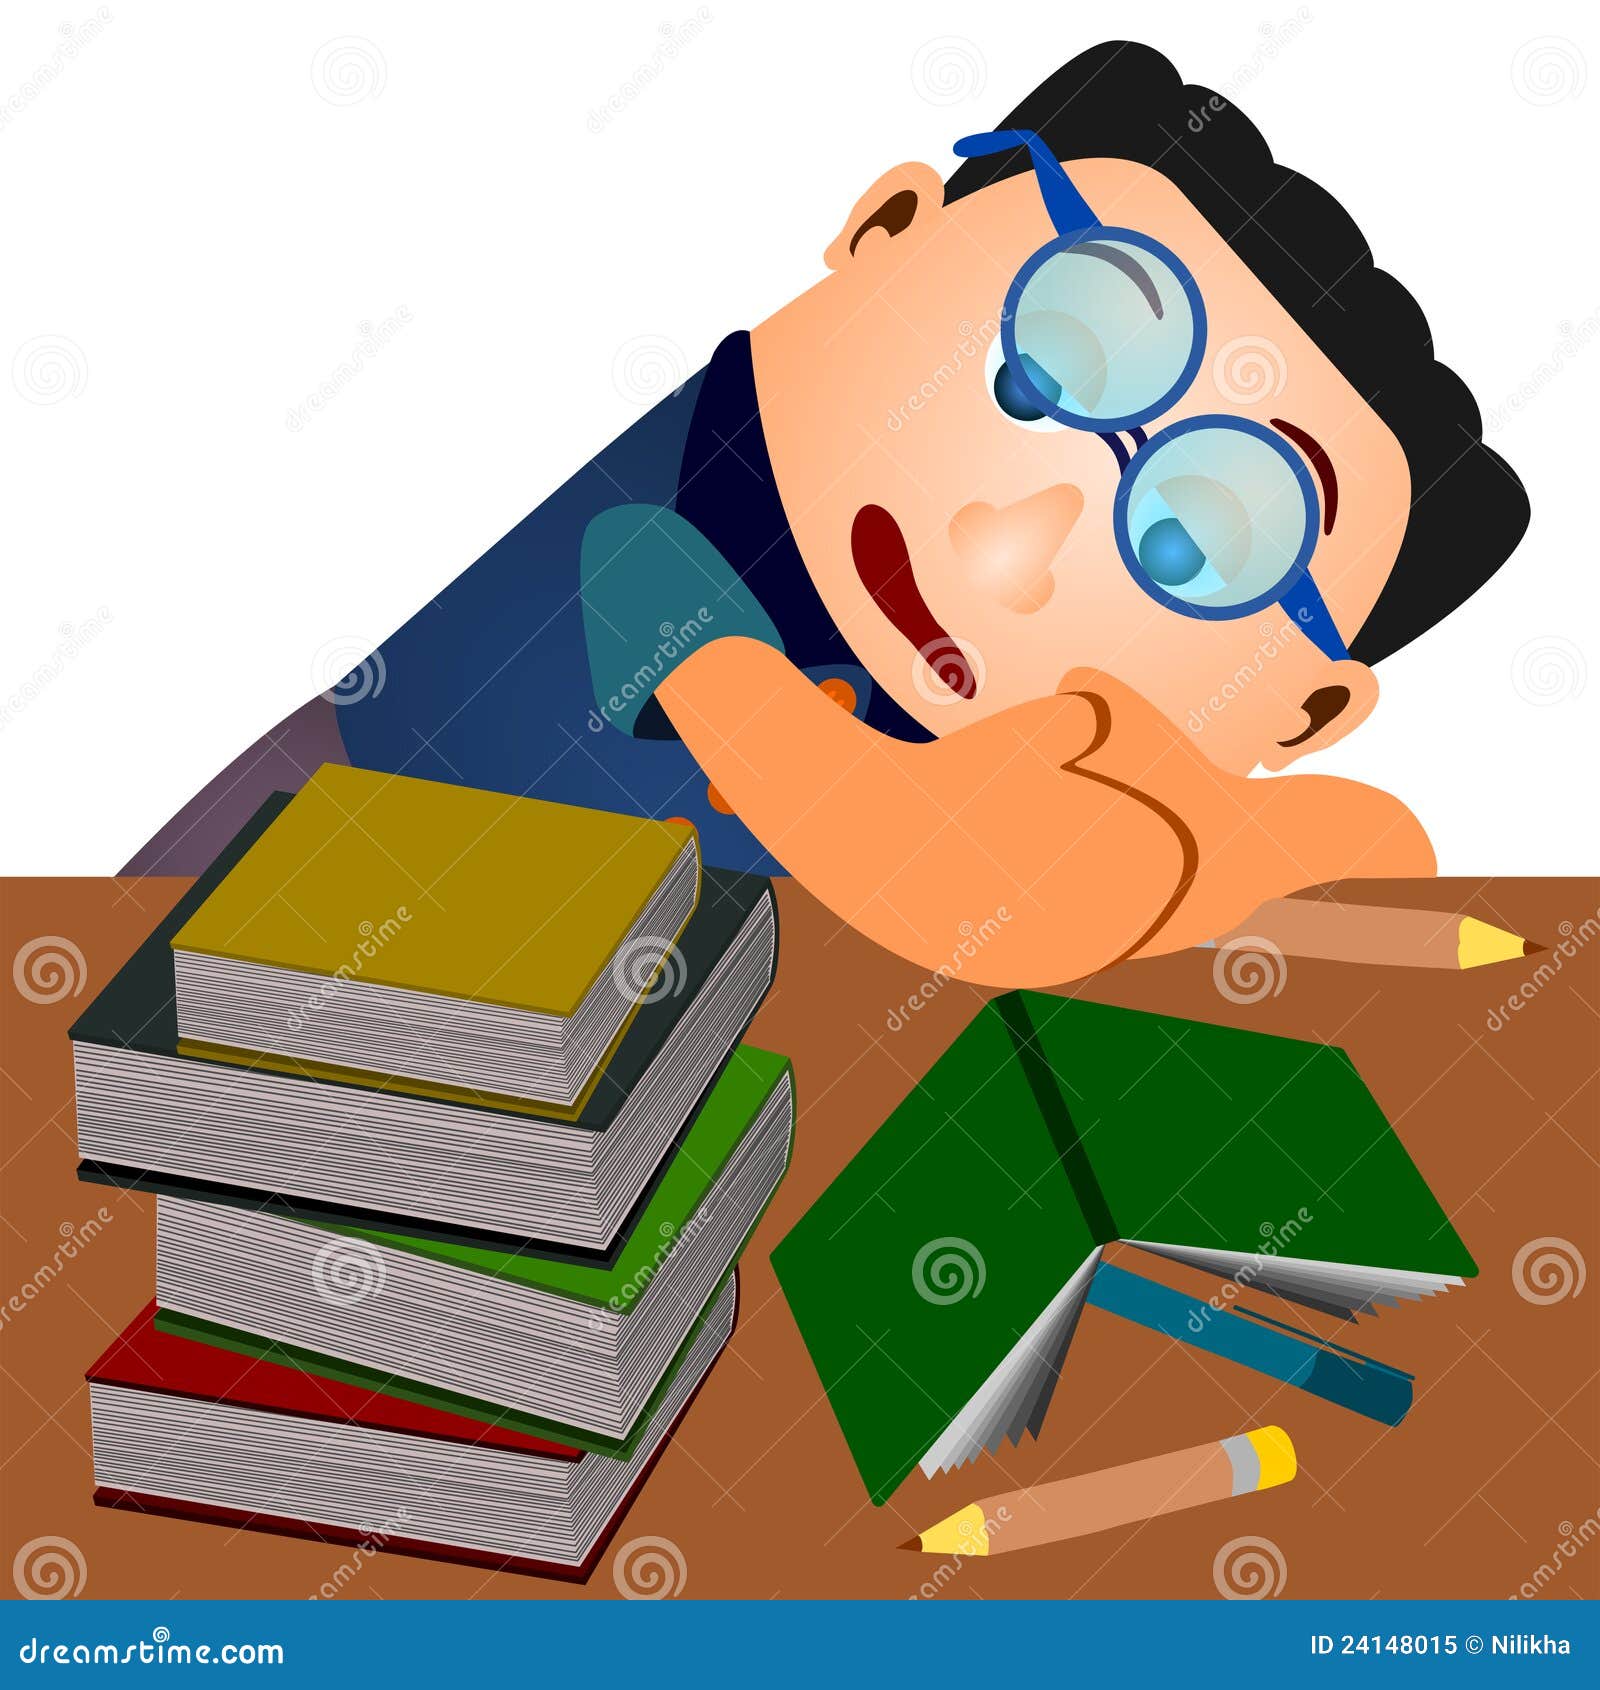 Exhausted Studying Cartoon Stock Illustrations – 268 Exhausted Studying  Cartoon Stock Illustrations, Vectors & Clipart - Dreamstime